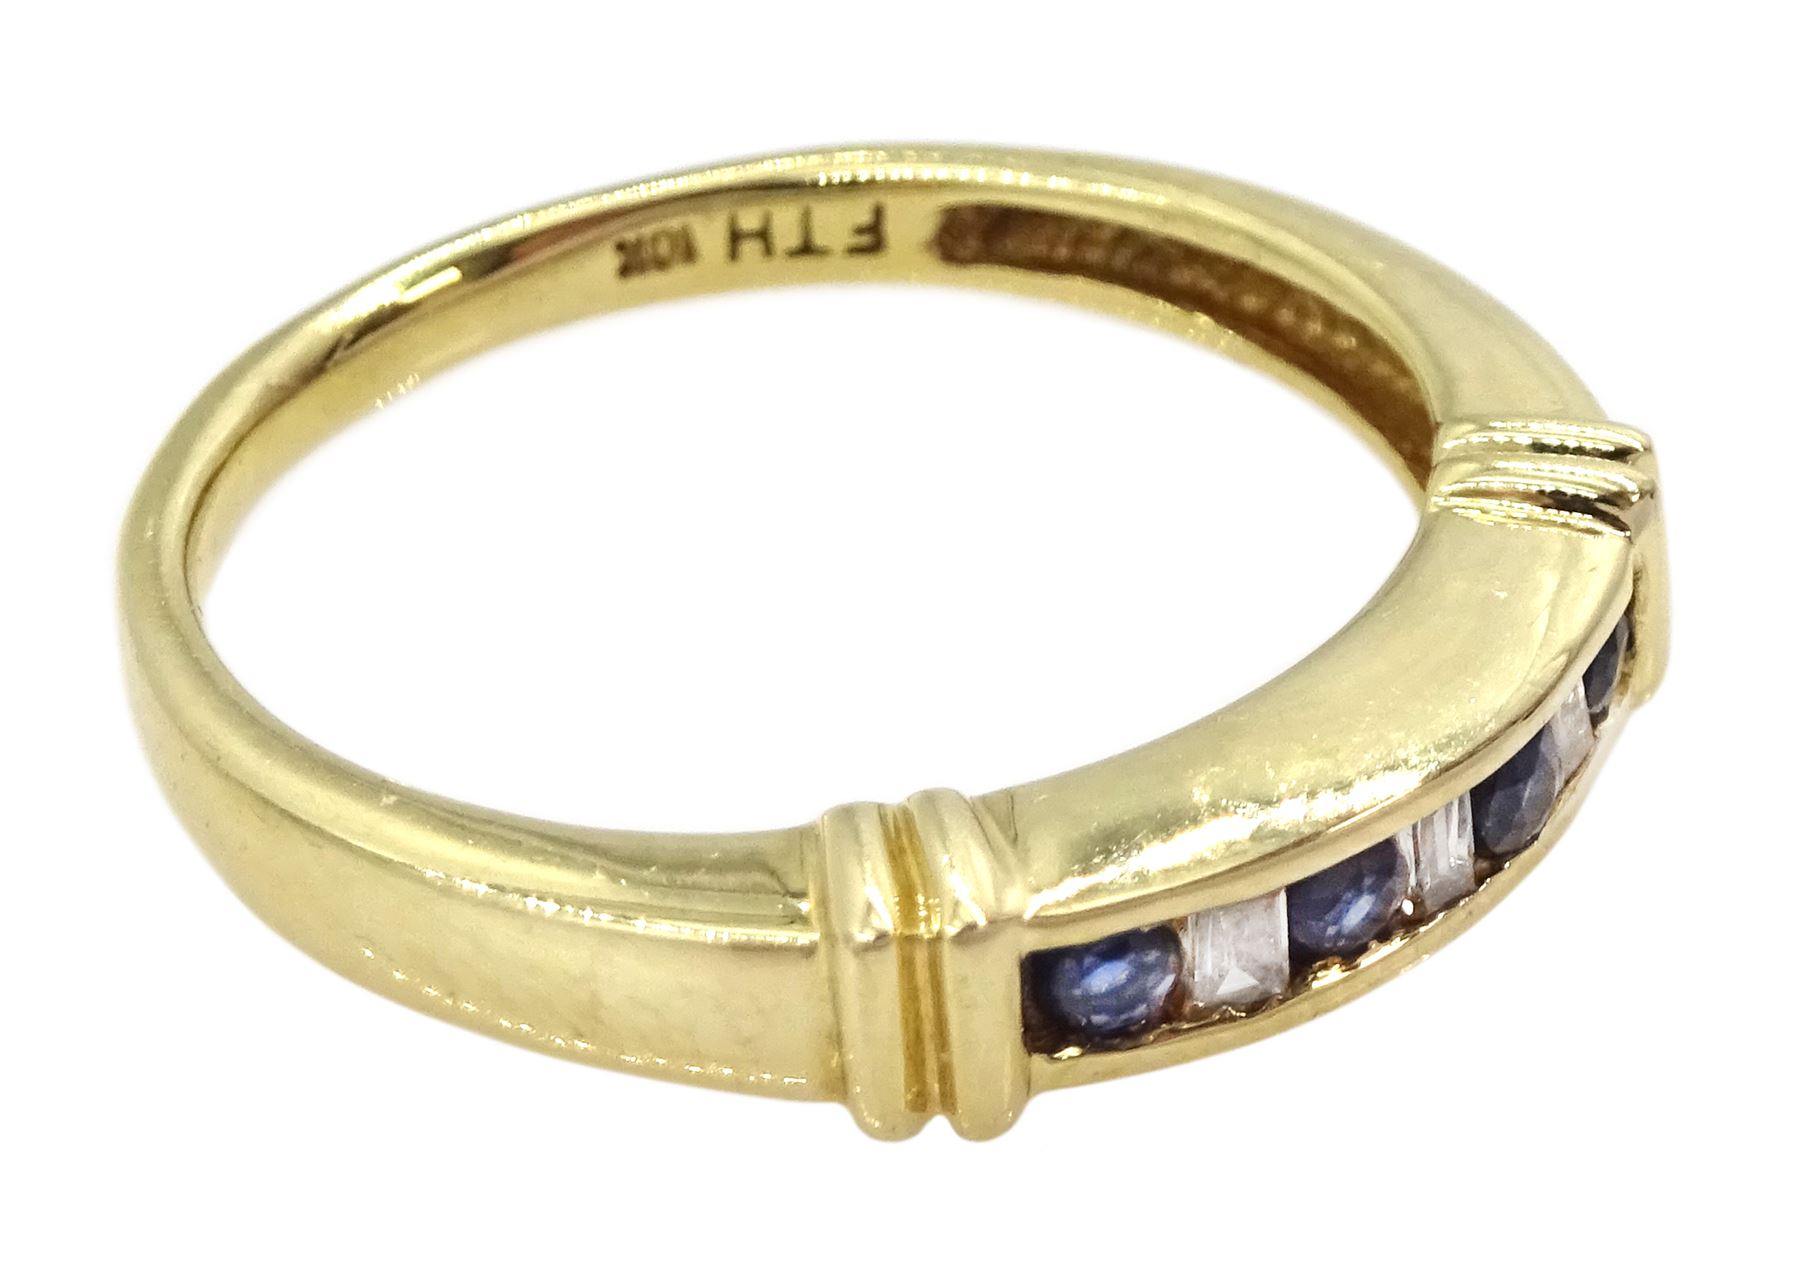 10ct gold channel set round sapphire and baguette cut diamond ring - Image 3 of 4